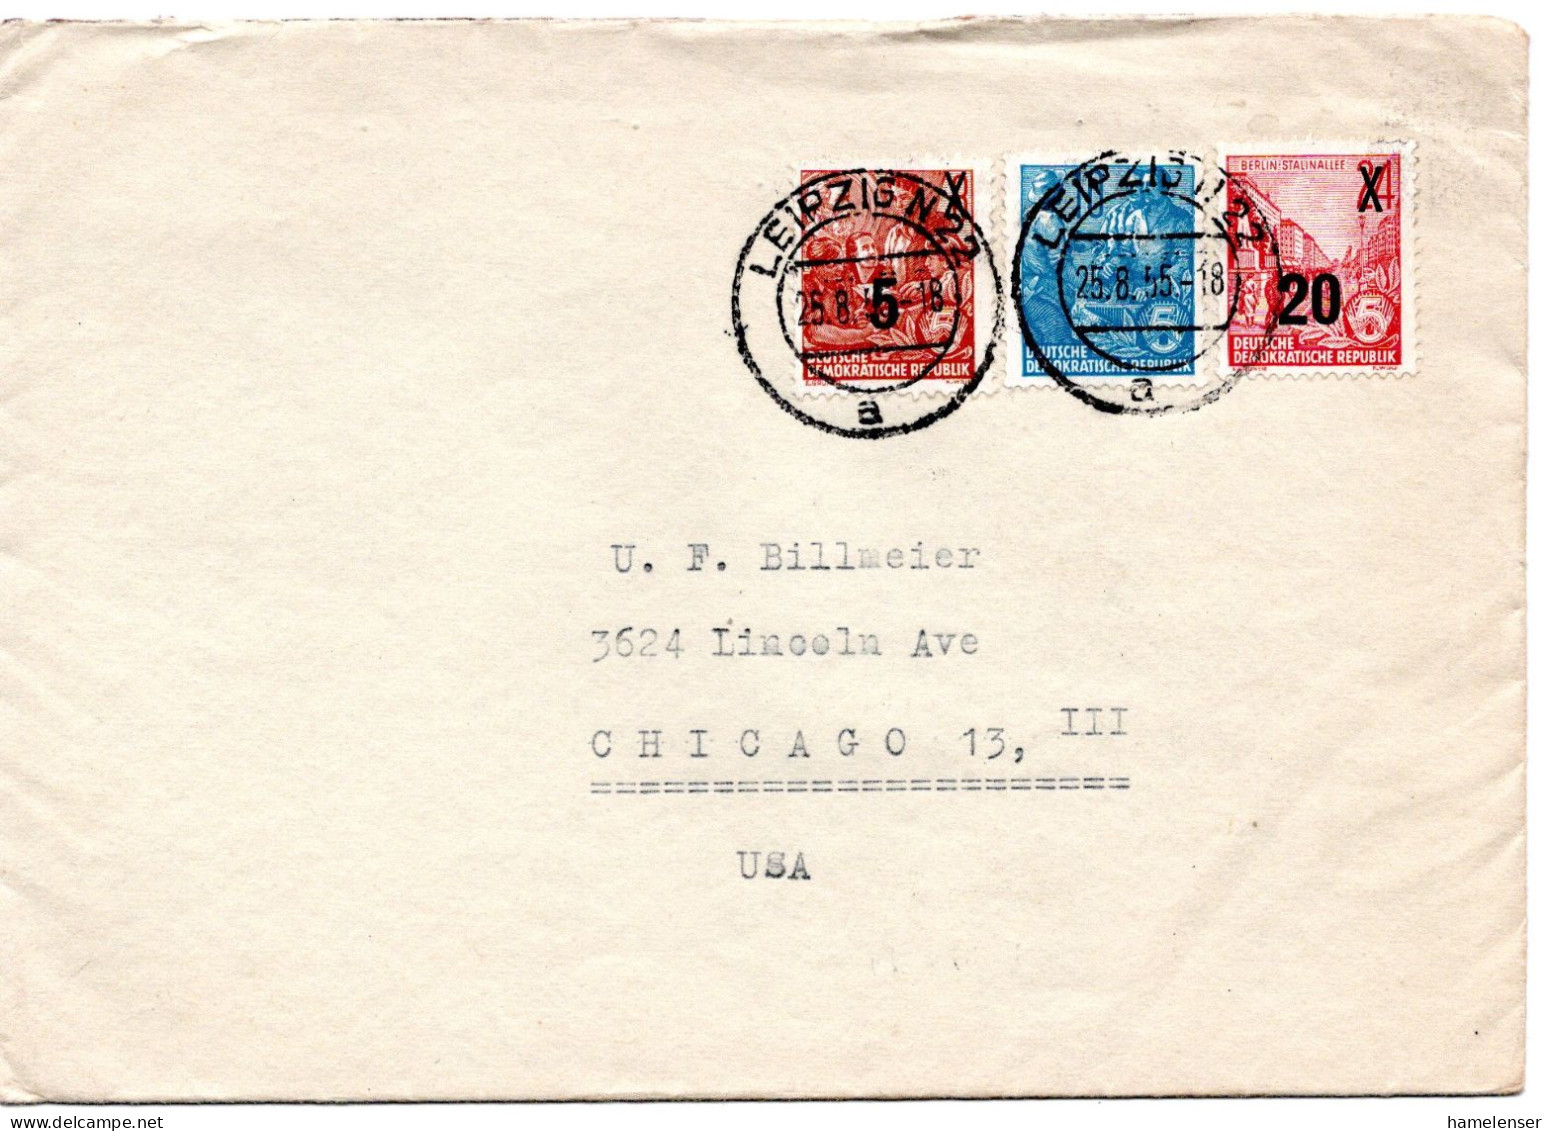 64983 - DDR - 1955 - 20/24Pfg Fuenfjahrplan MiF A Bf LEIPZIG -> Chicago, IL (USA), Rs Spendenmarken "Nationale Front" - Covers & Documents